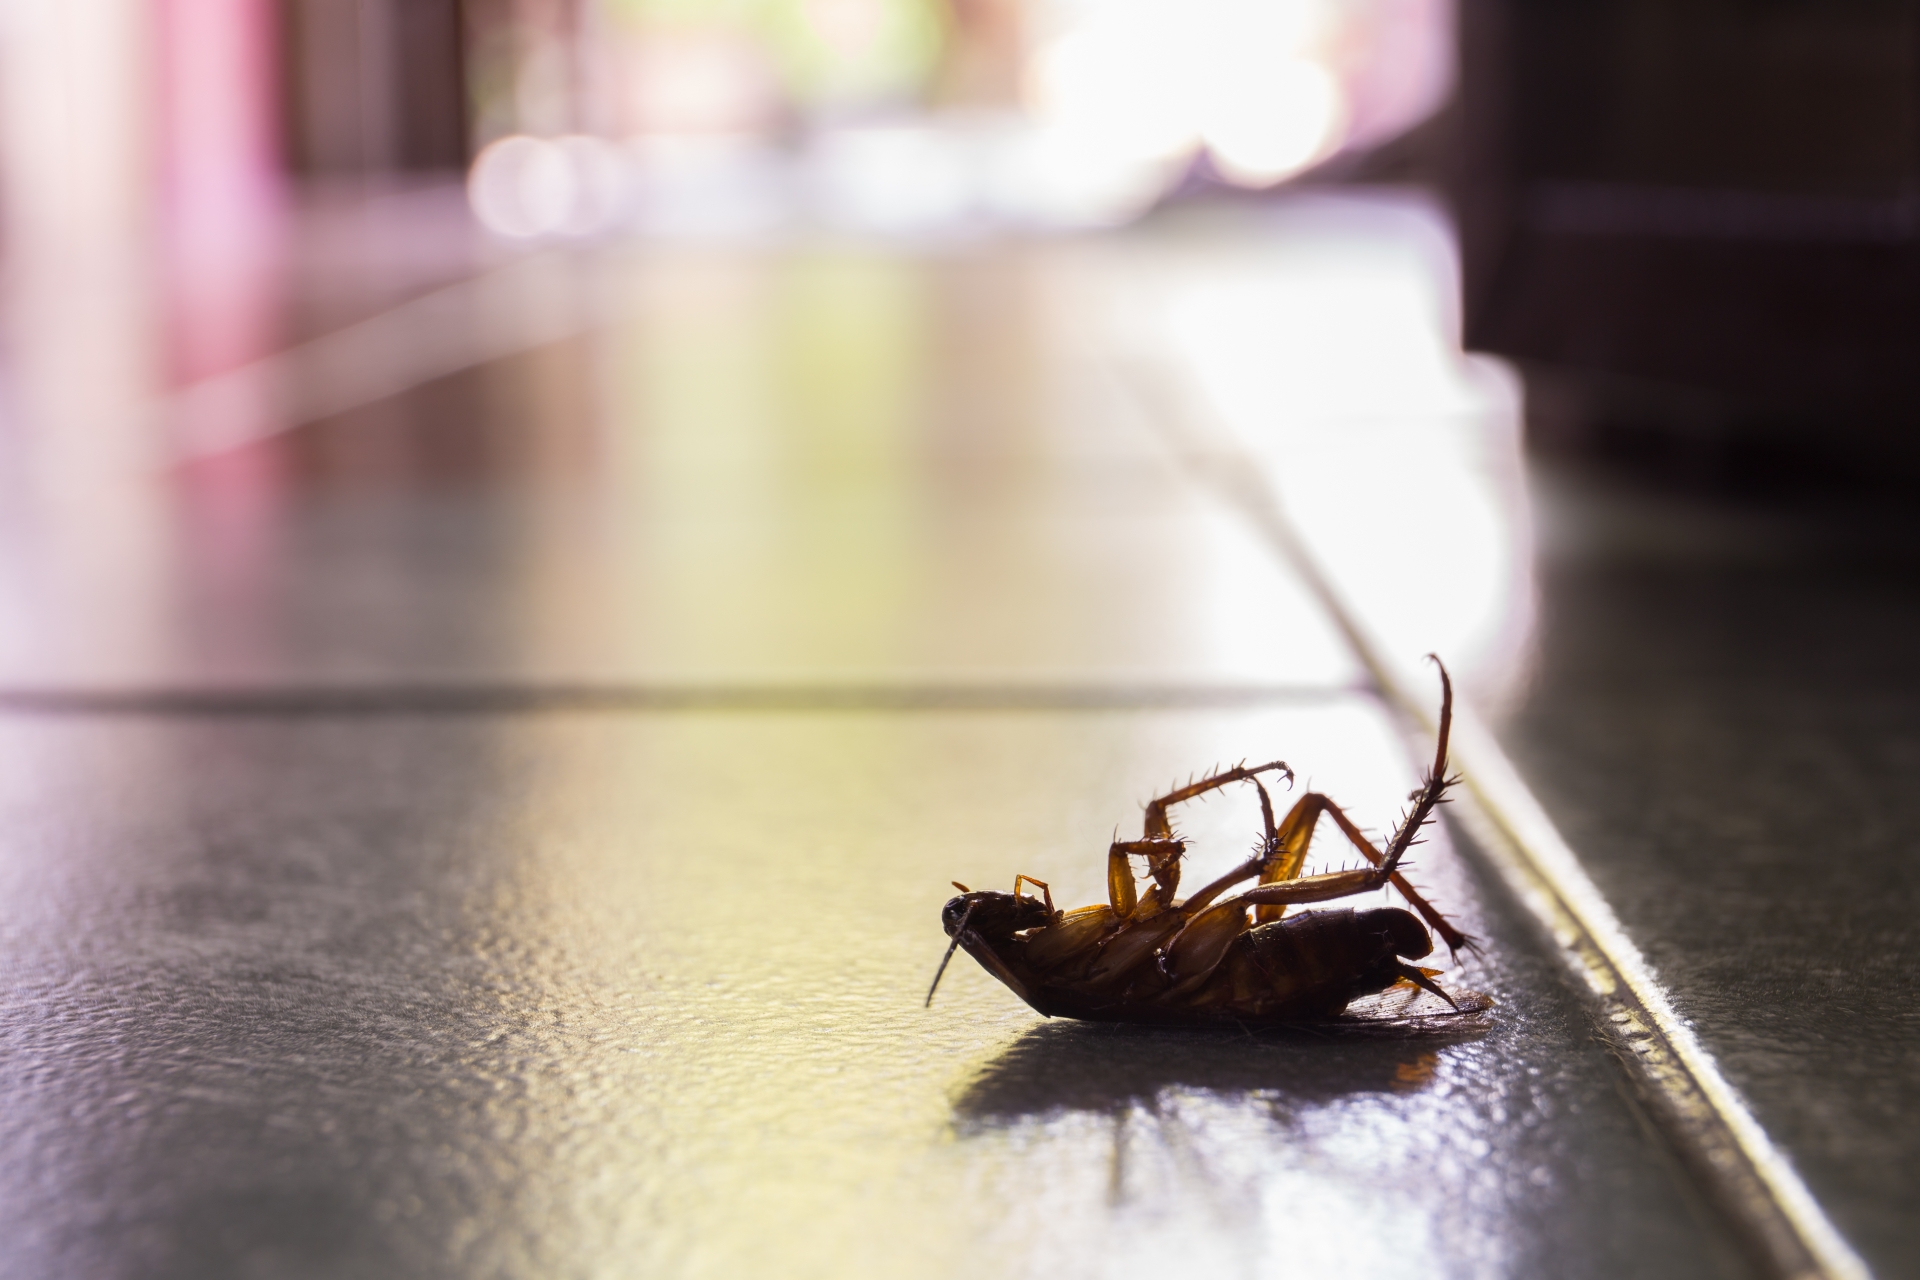 Cockroach Control, Pest Control in Ealing, W5. Call Now 020 8166 9746